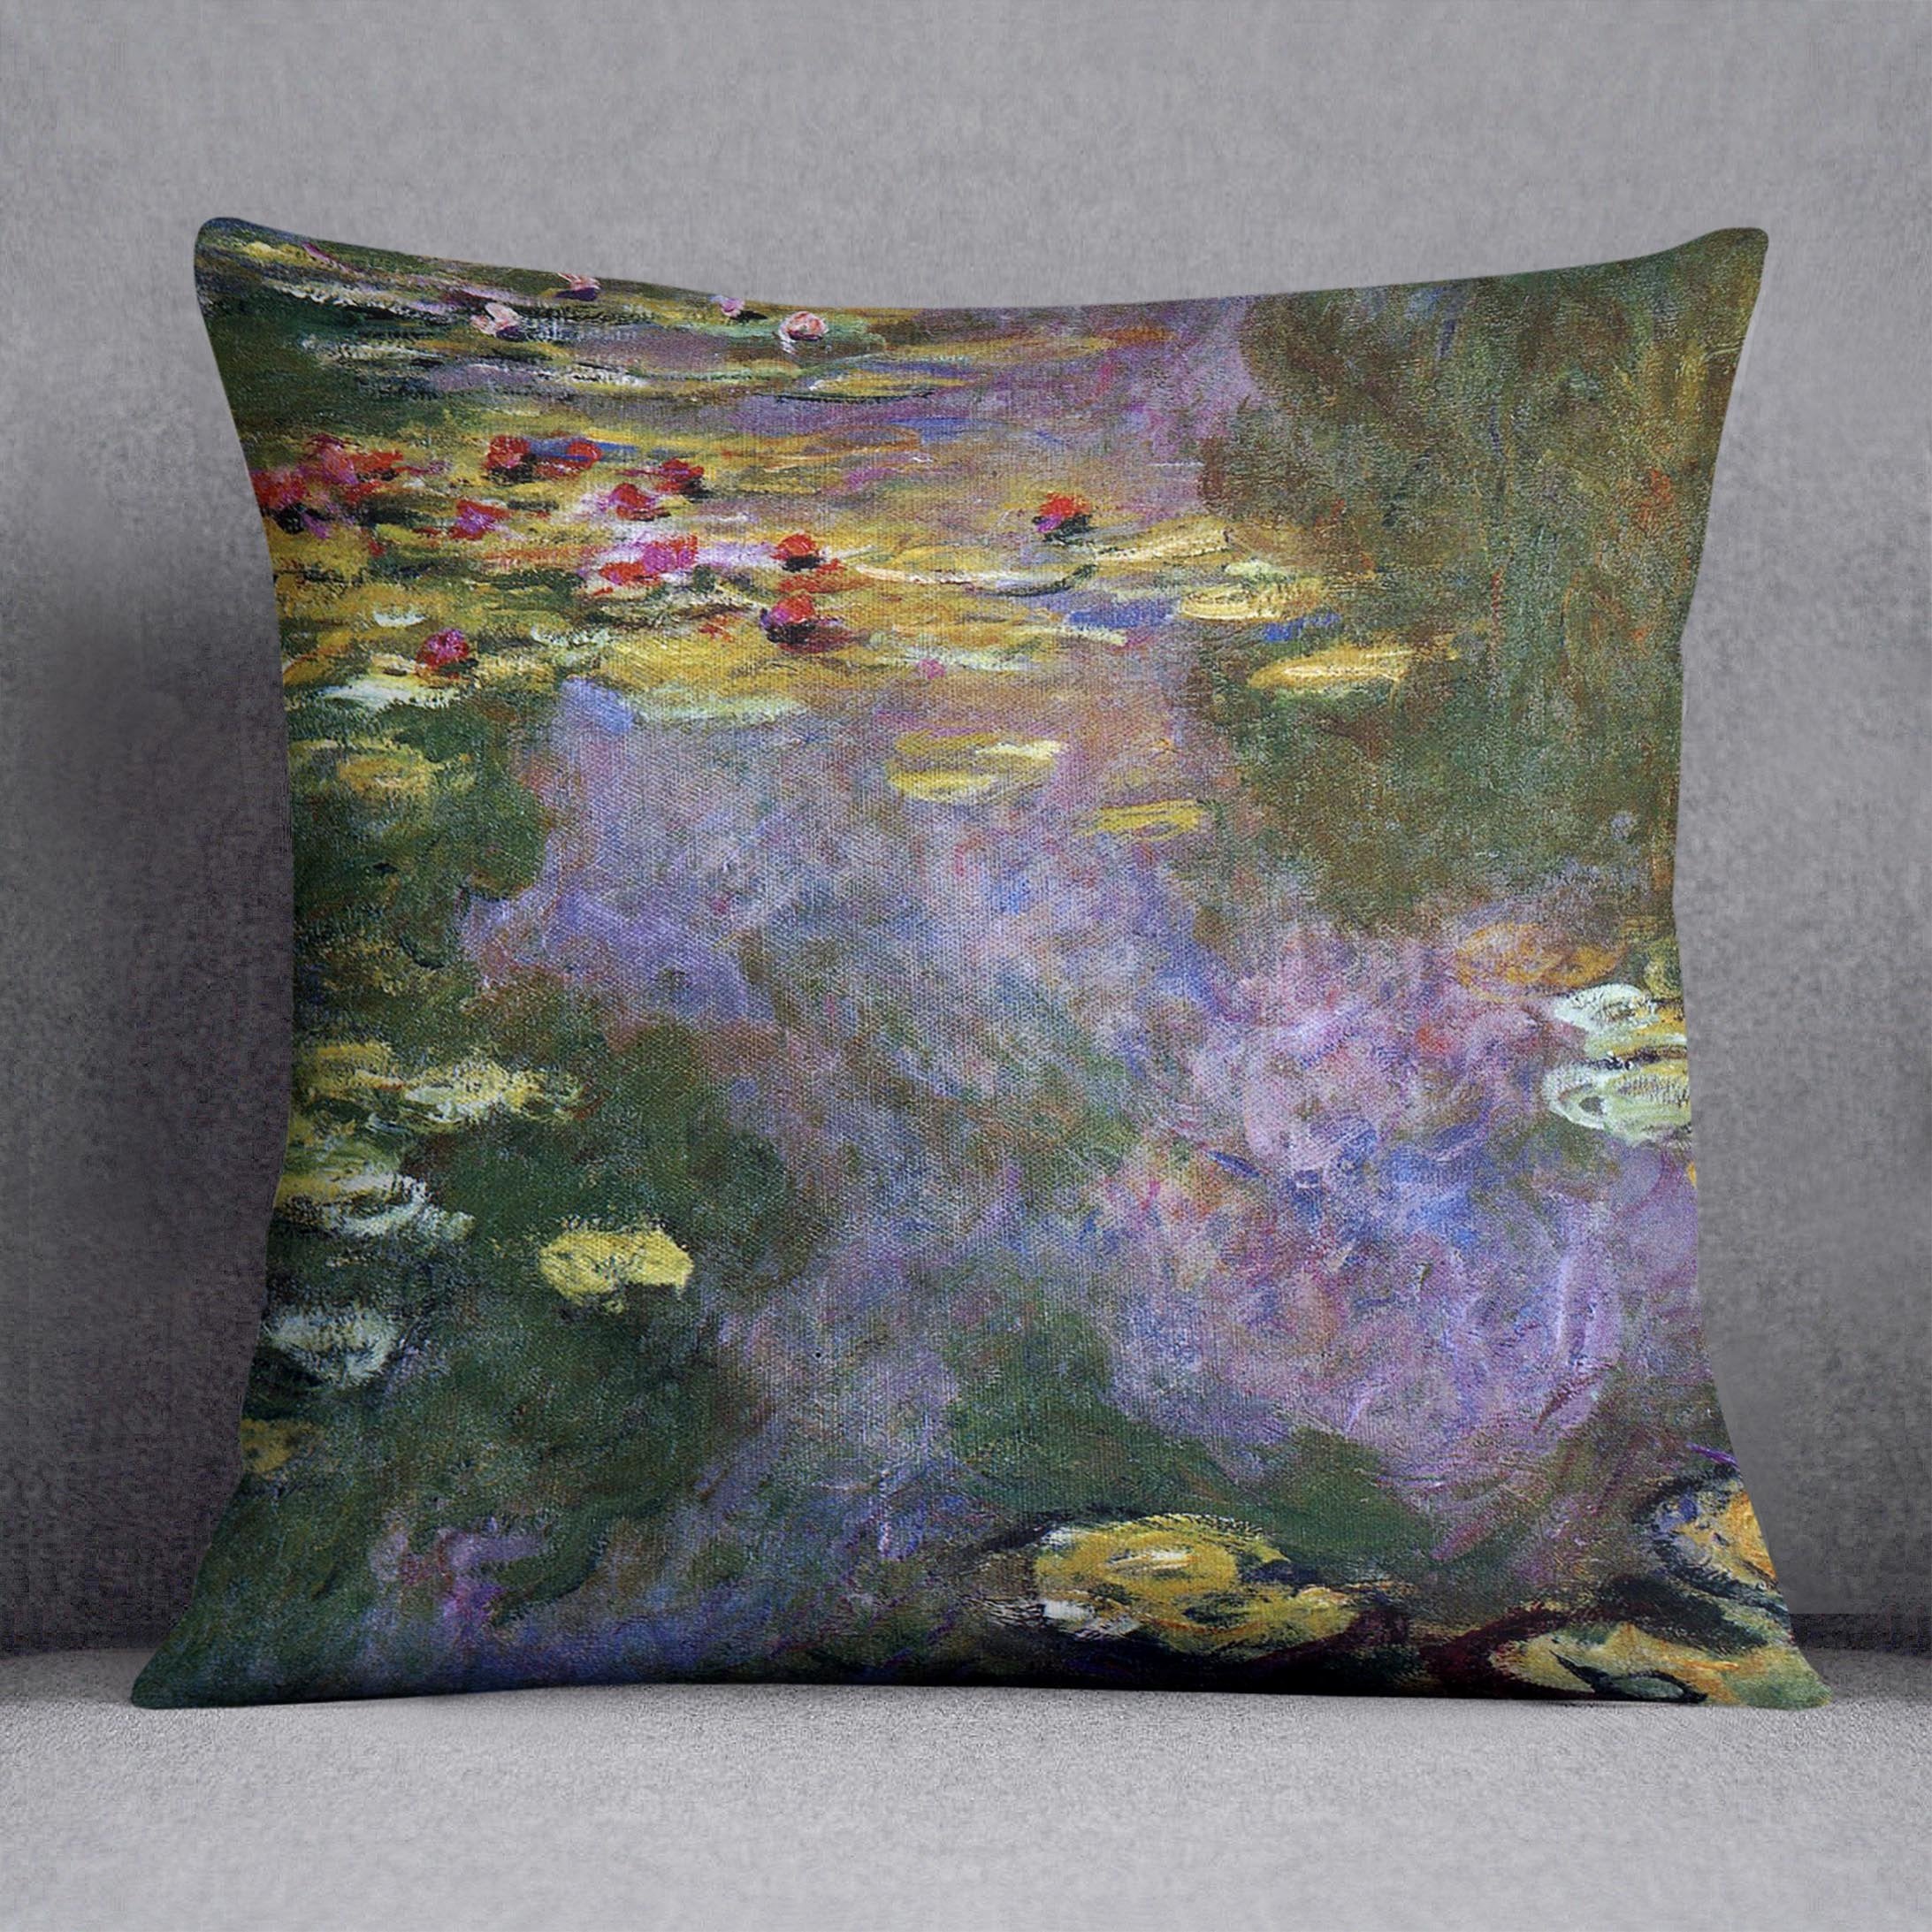 Water Lily Pond Giverny by Monet Throw Pillow